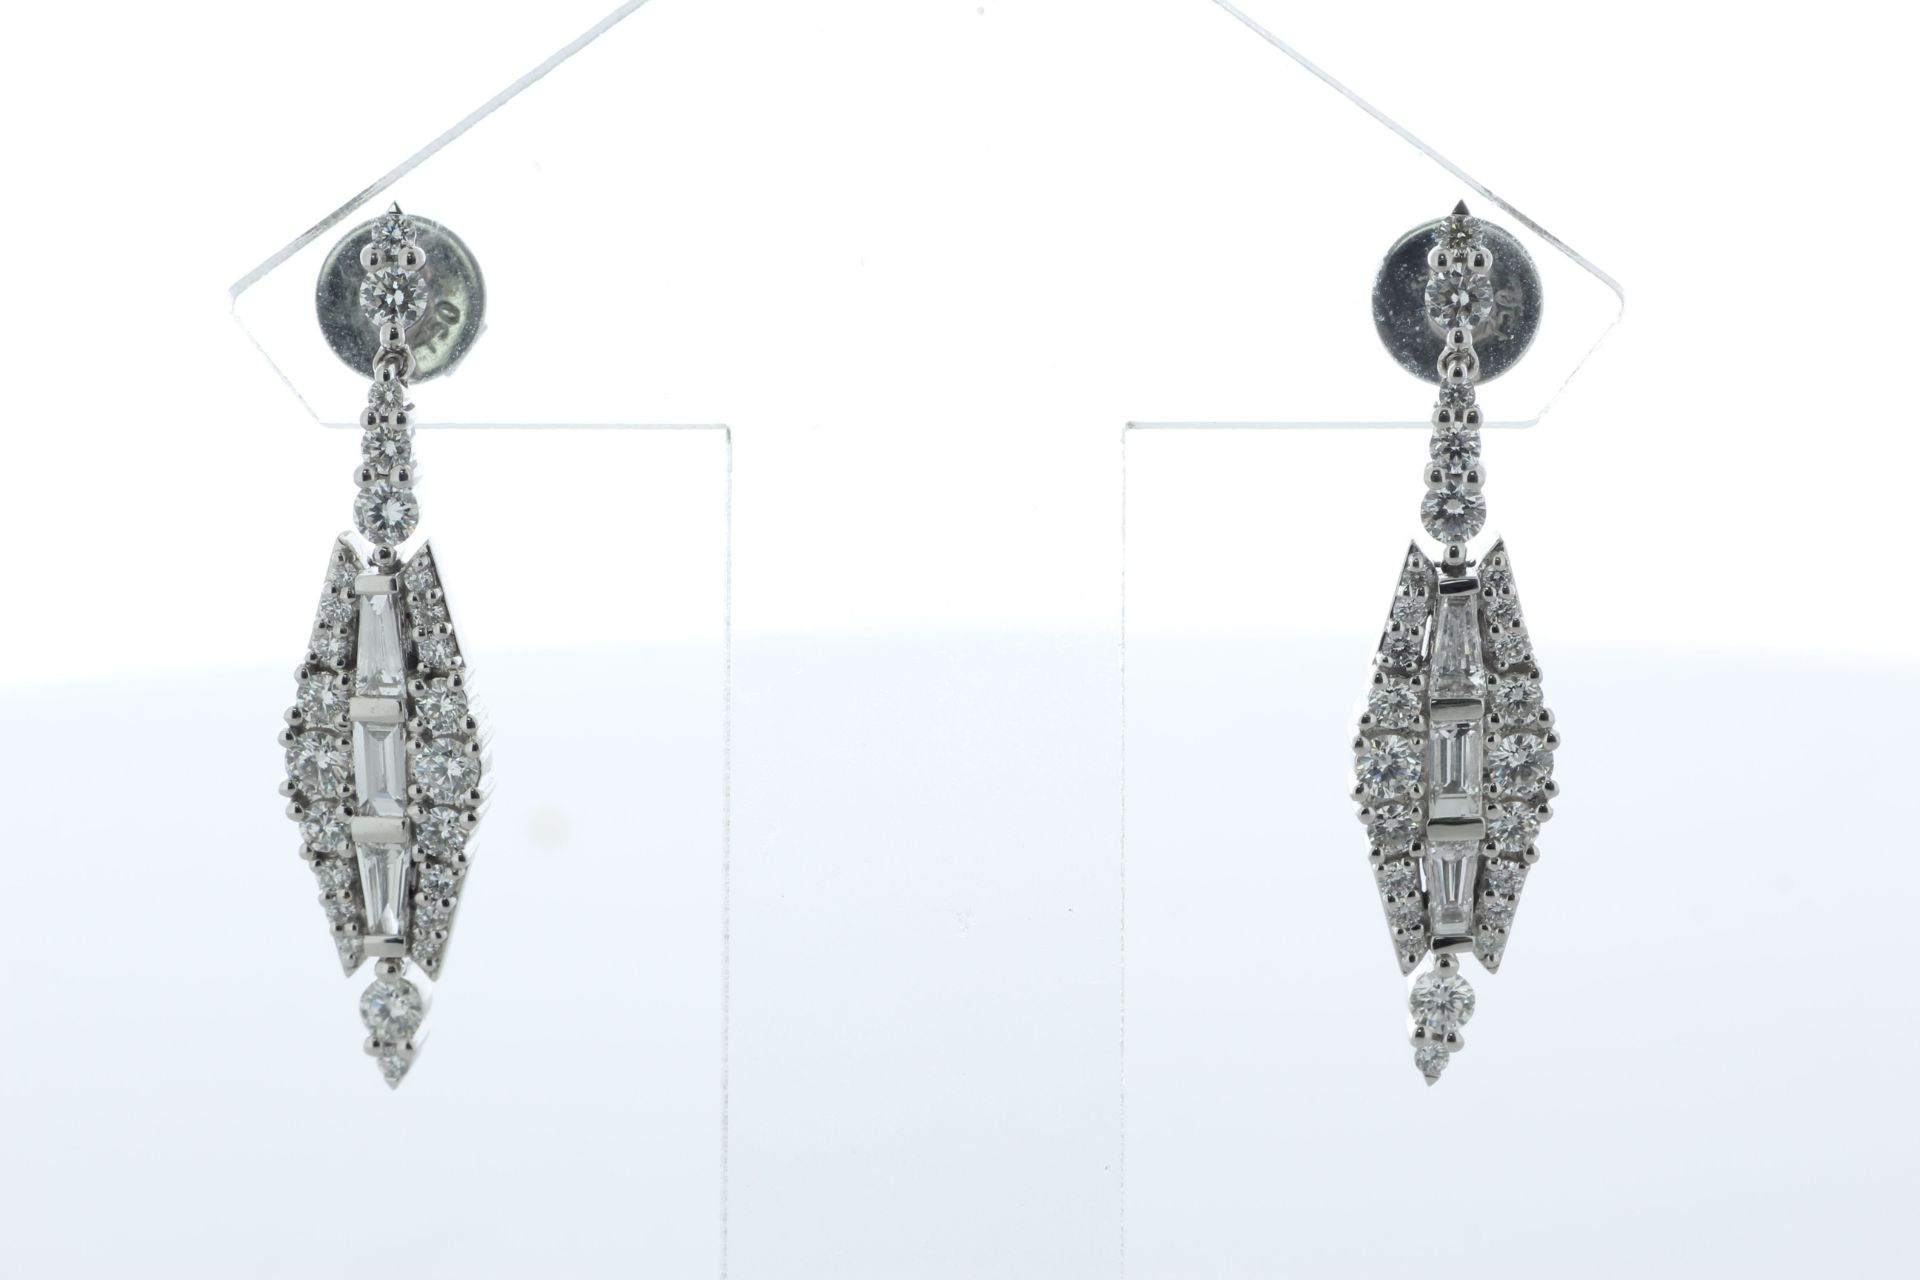 18ct White Gold Diamond Drop Earring 1.75 Carats - Valued By IDI £14,140.00 - A stunning pair of